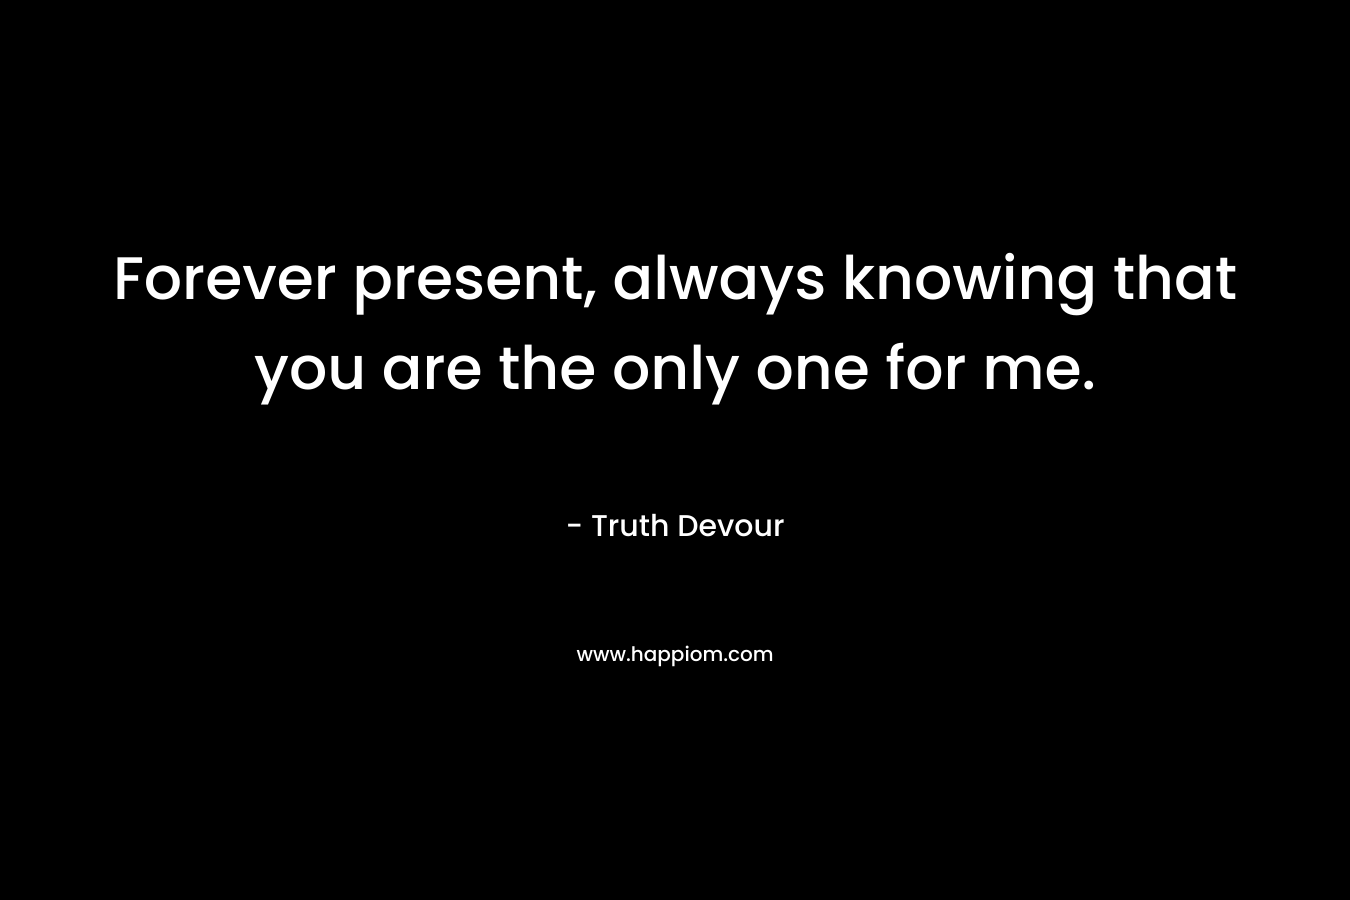 Forever present, always knowing that you are the only one for me.